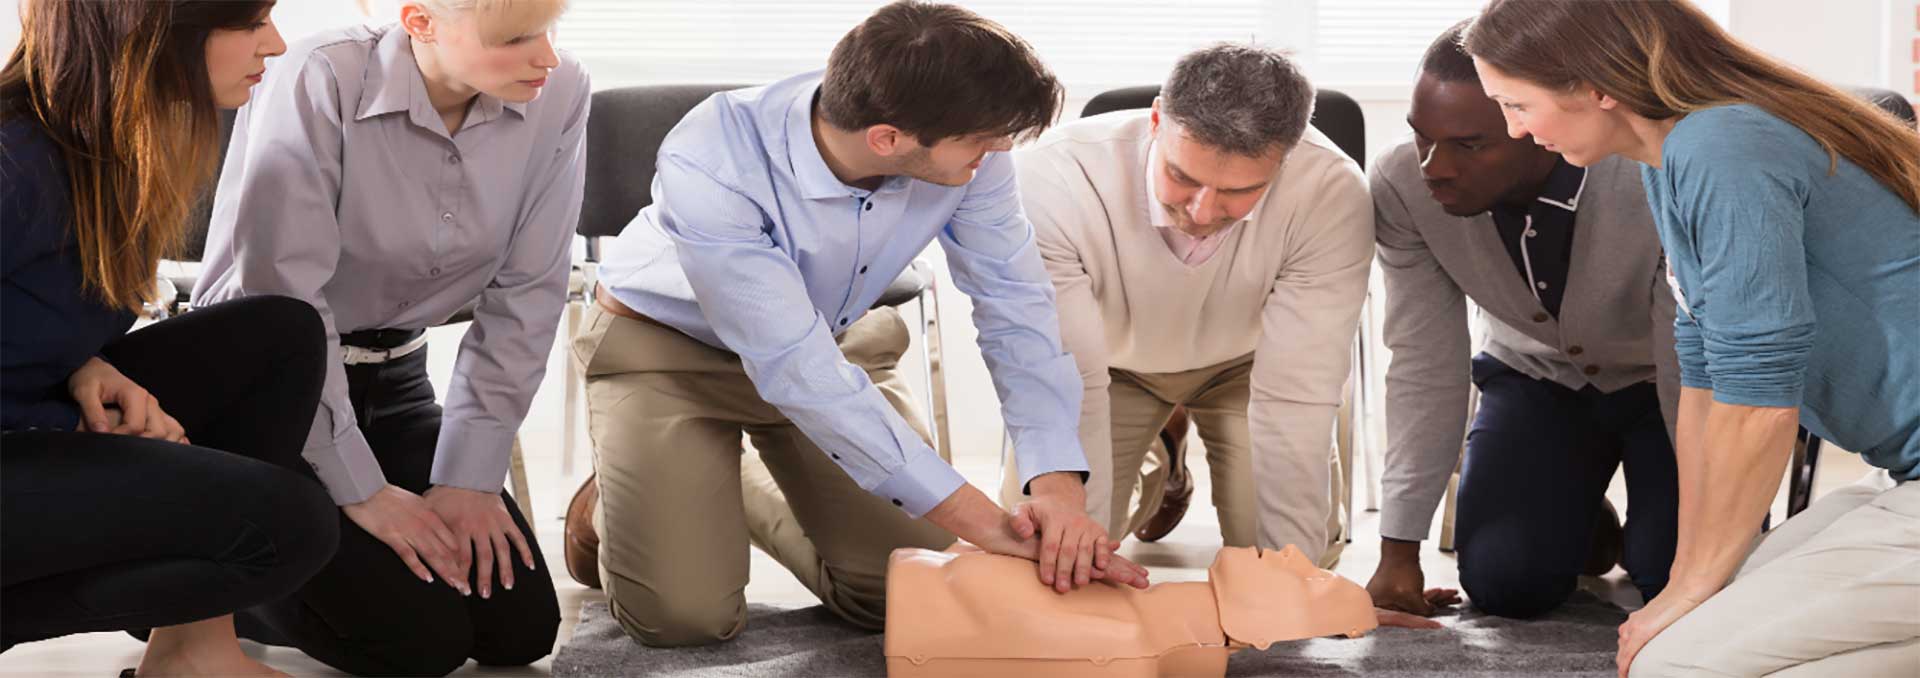 CPR class instructor demonstration on dummy